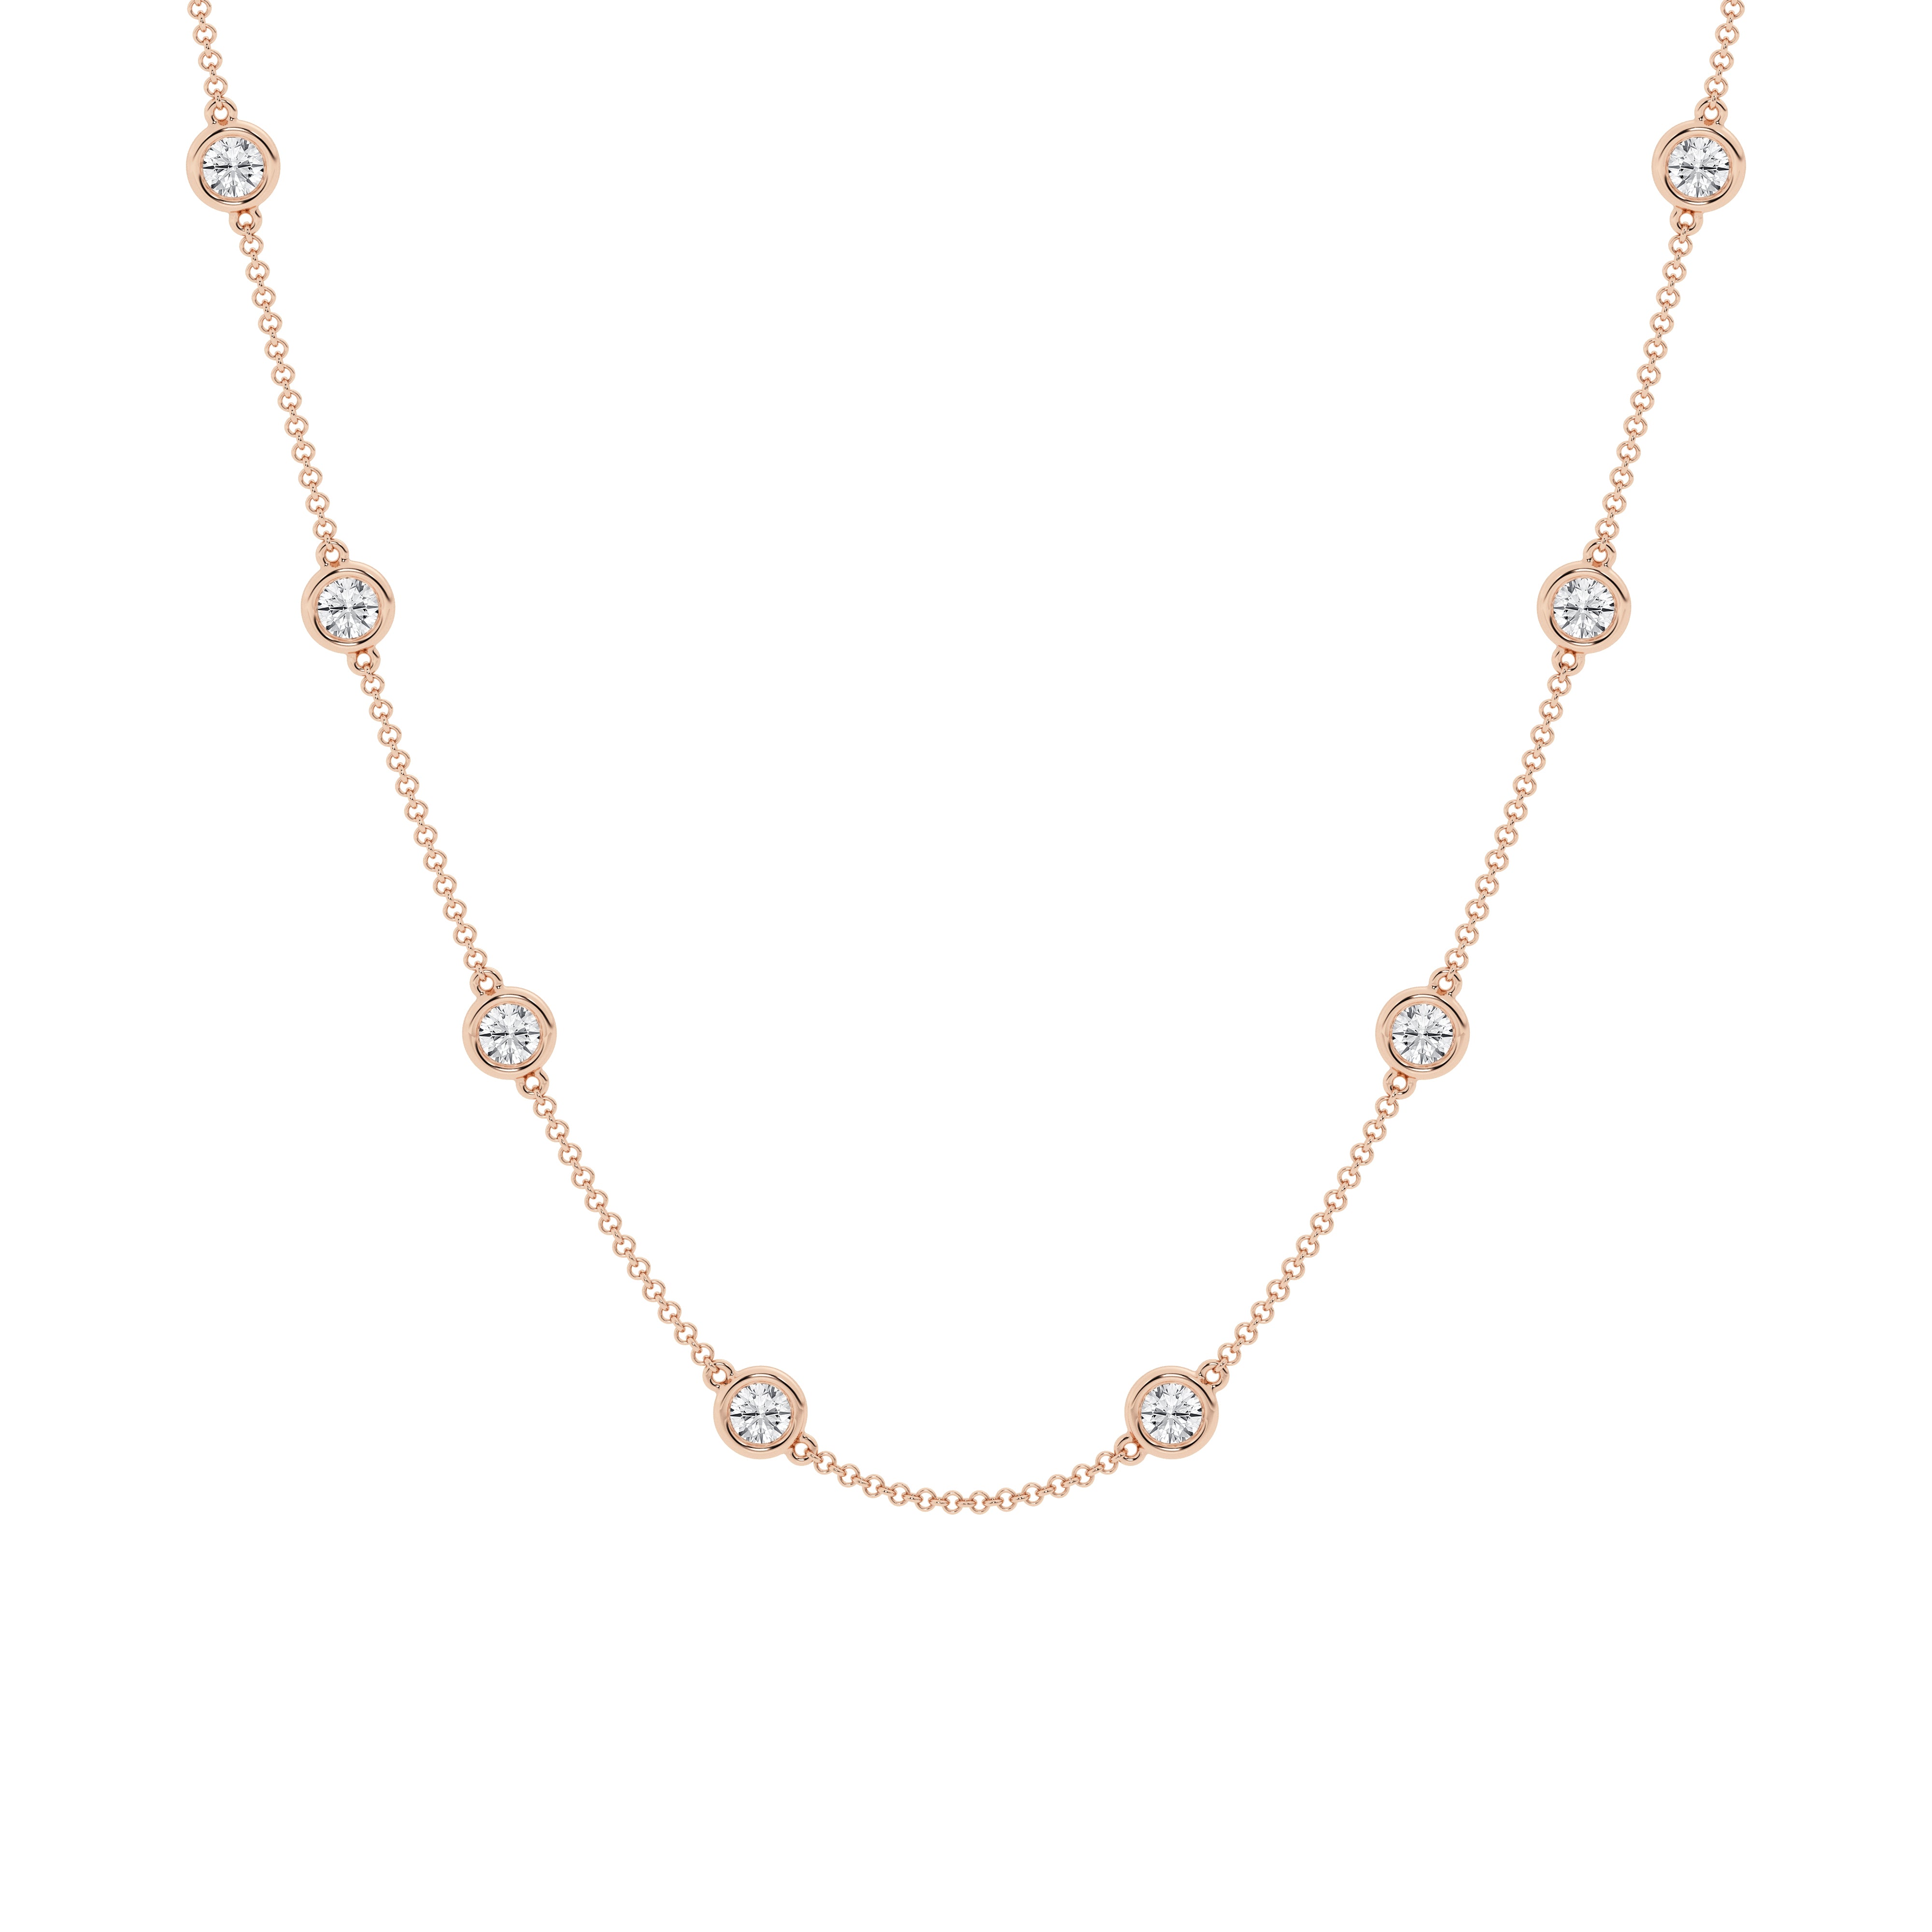 3 carat Diamond By The Yard Necklace